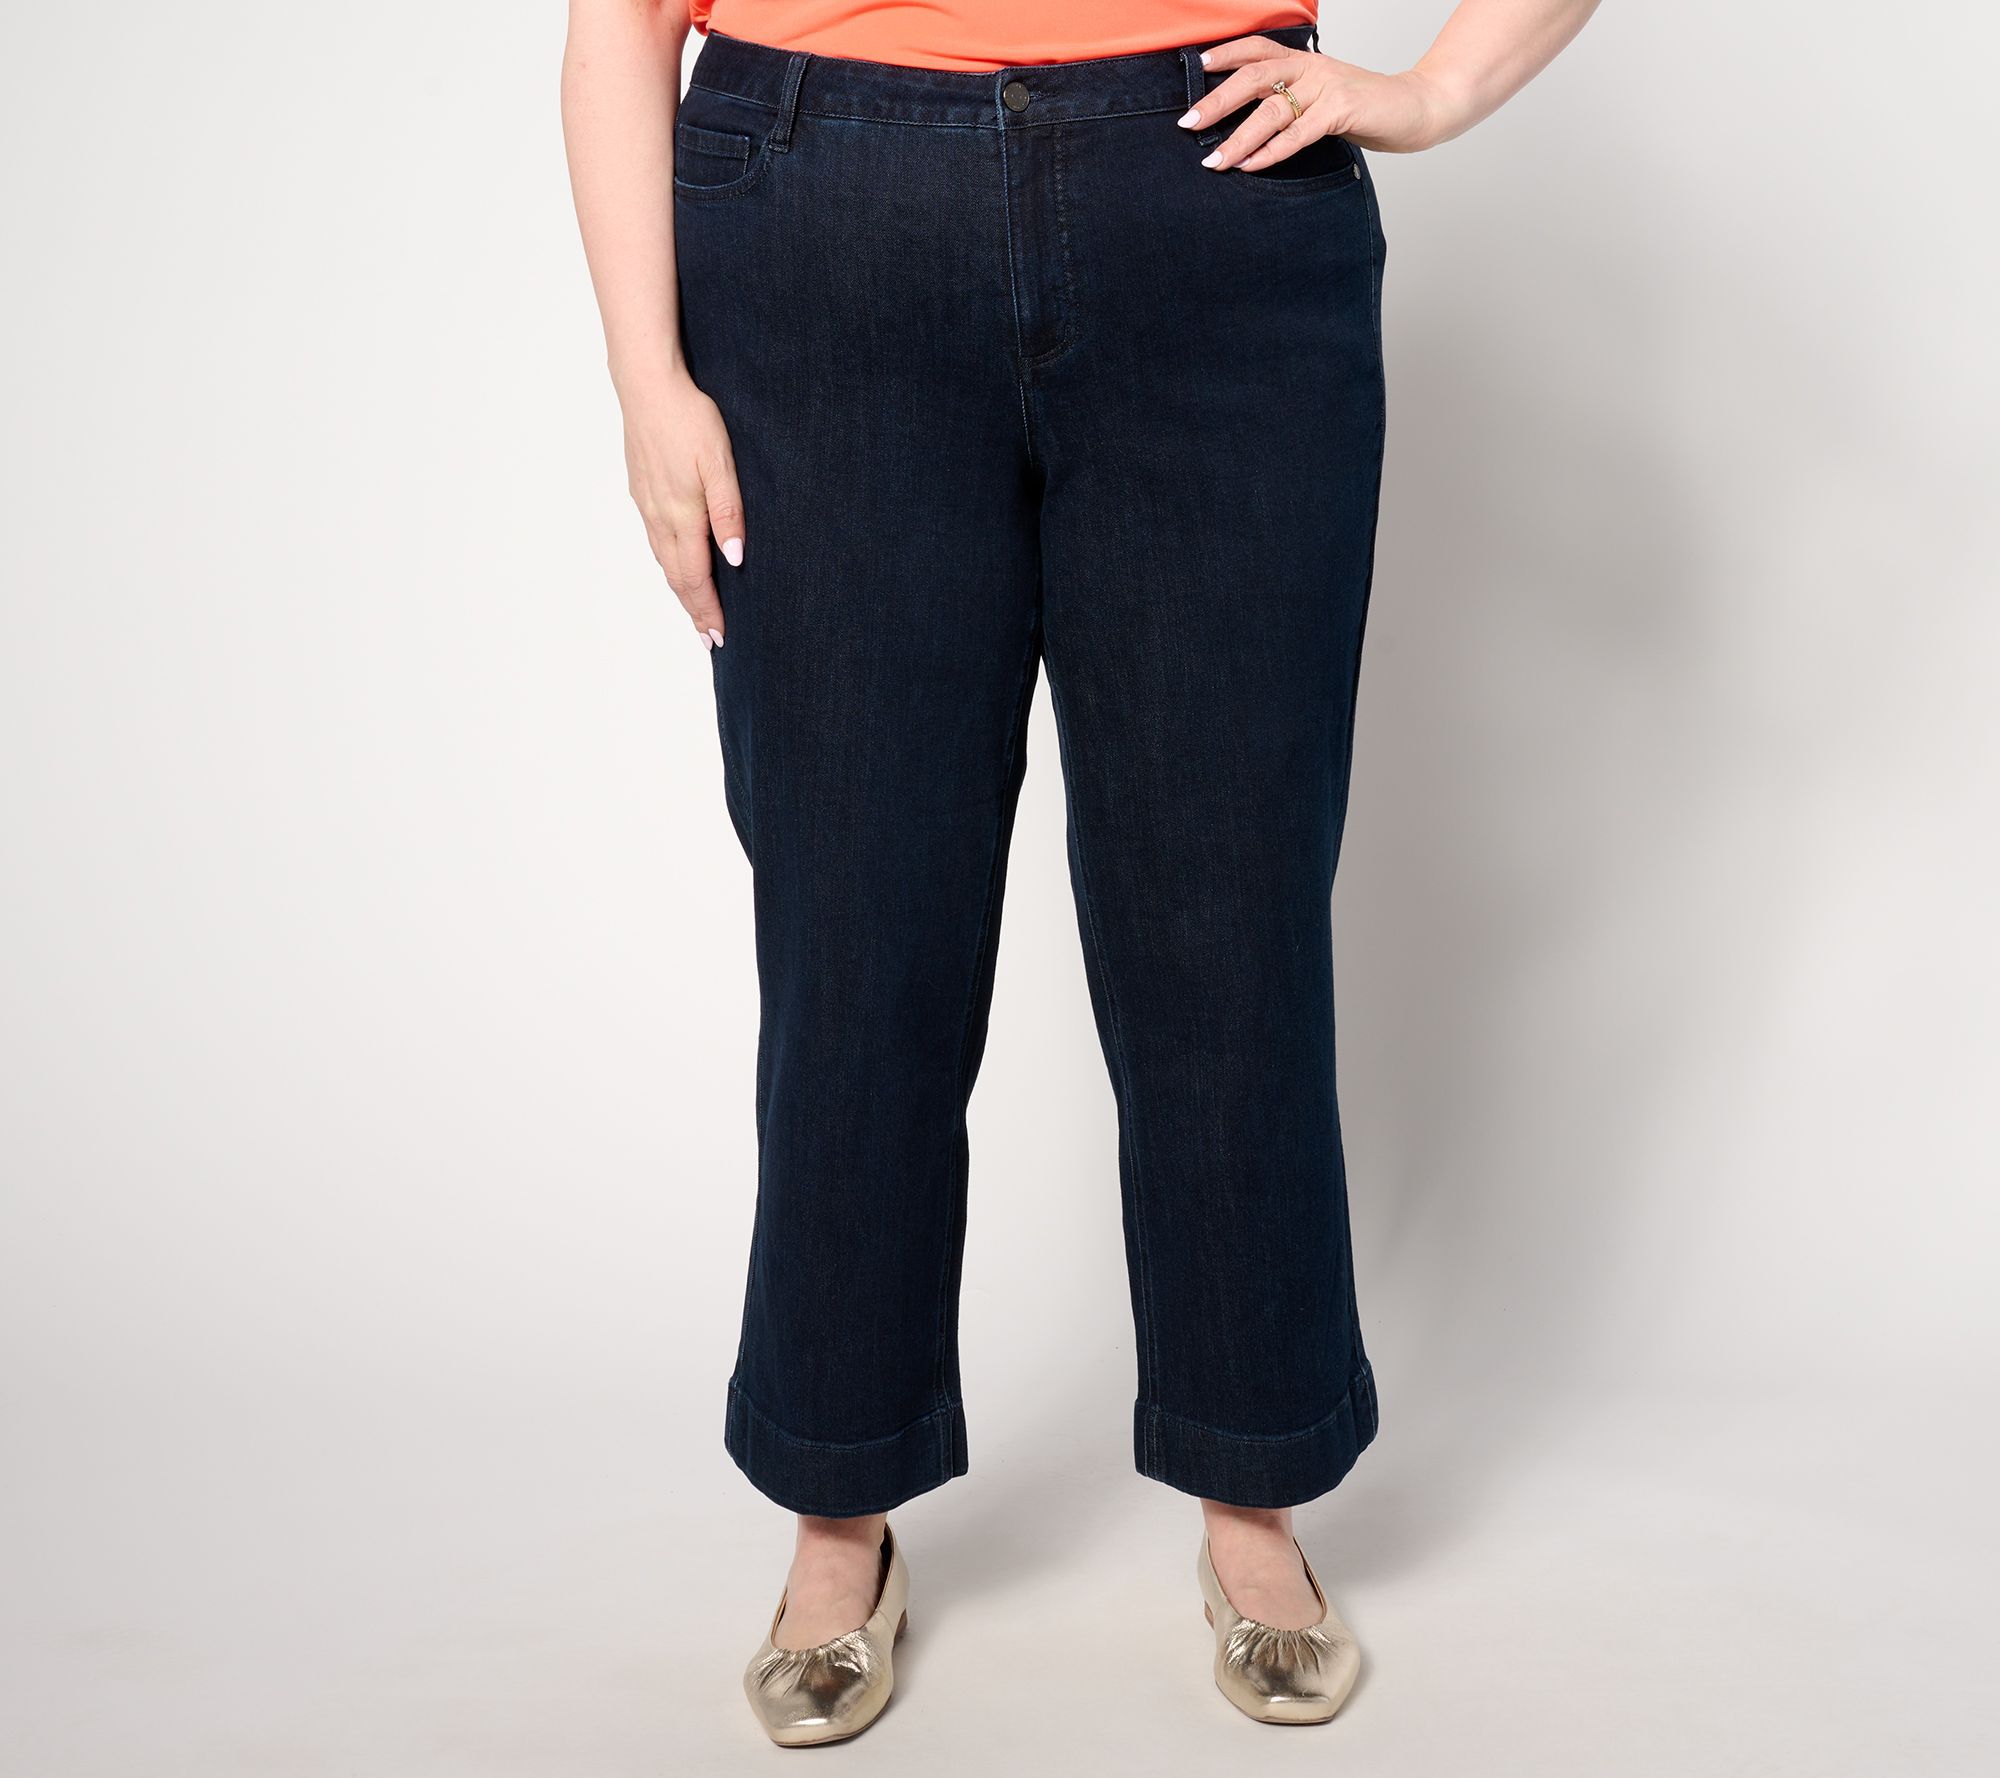 GRAVER By Susan Graver Stretch Denim French Terry Jean, 53% OFF